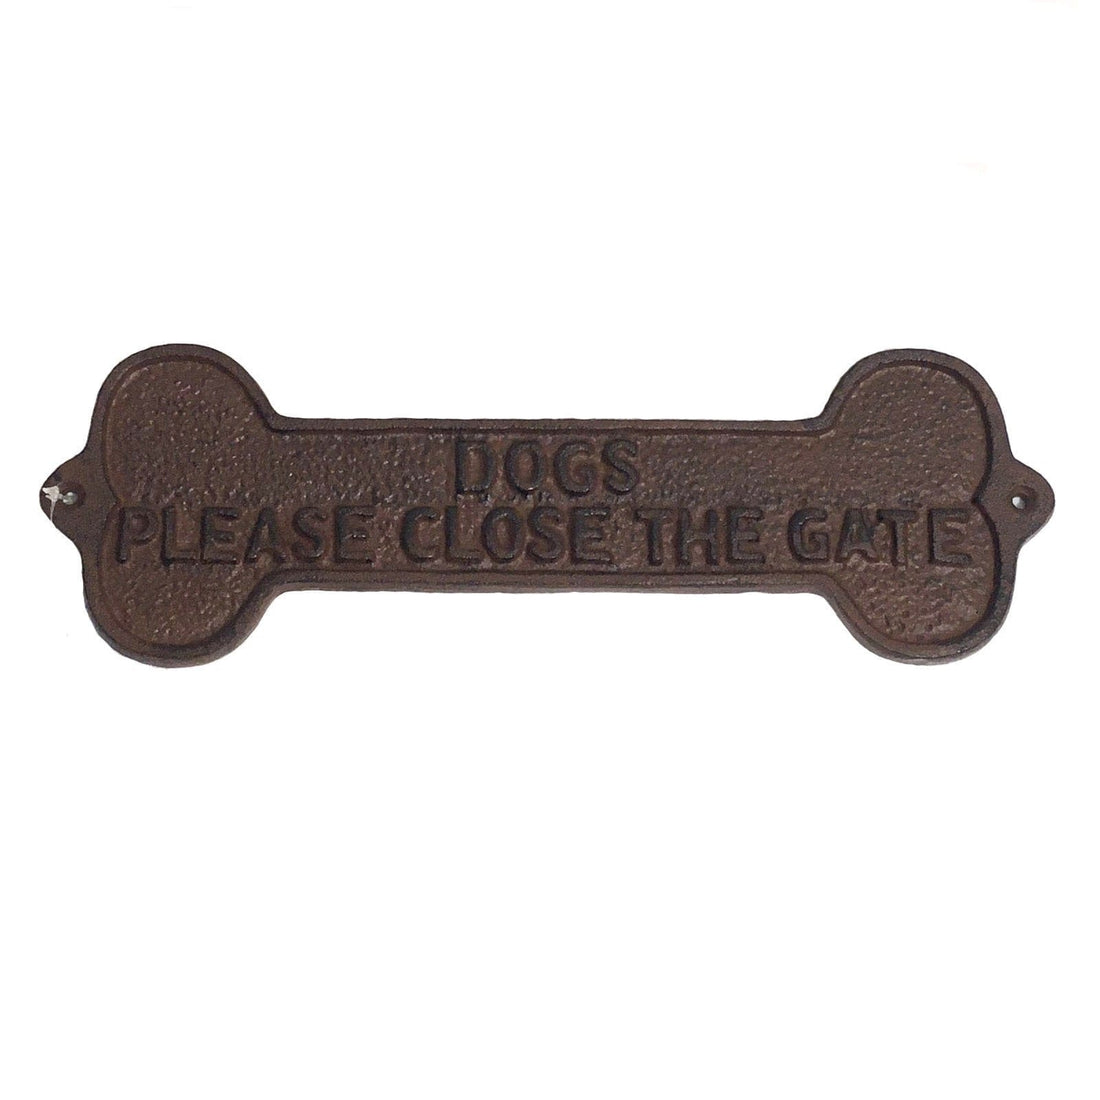 Dogs Please Close the Gate Sign - Cast Iron Sign